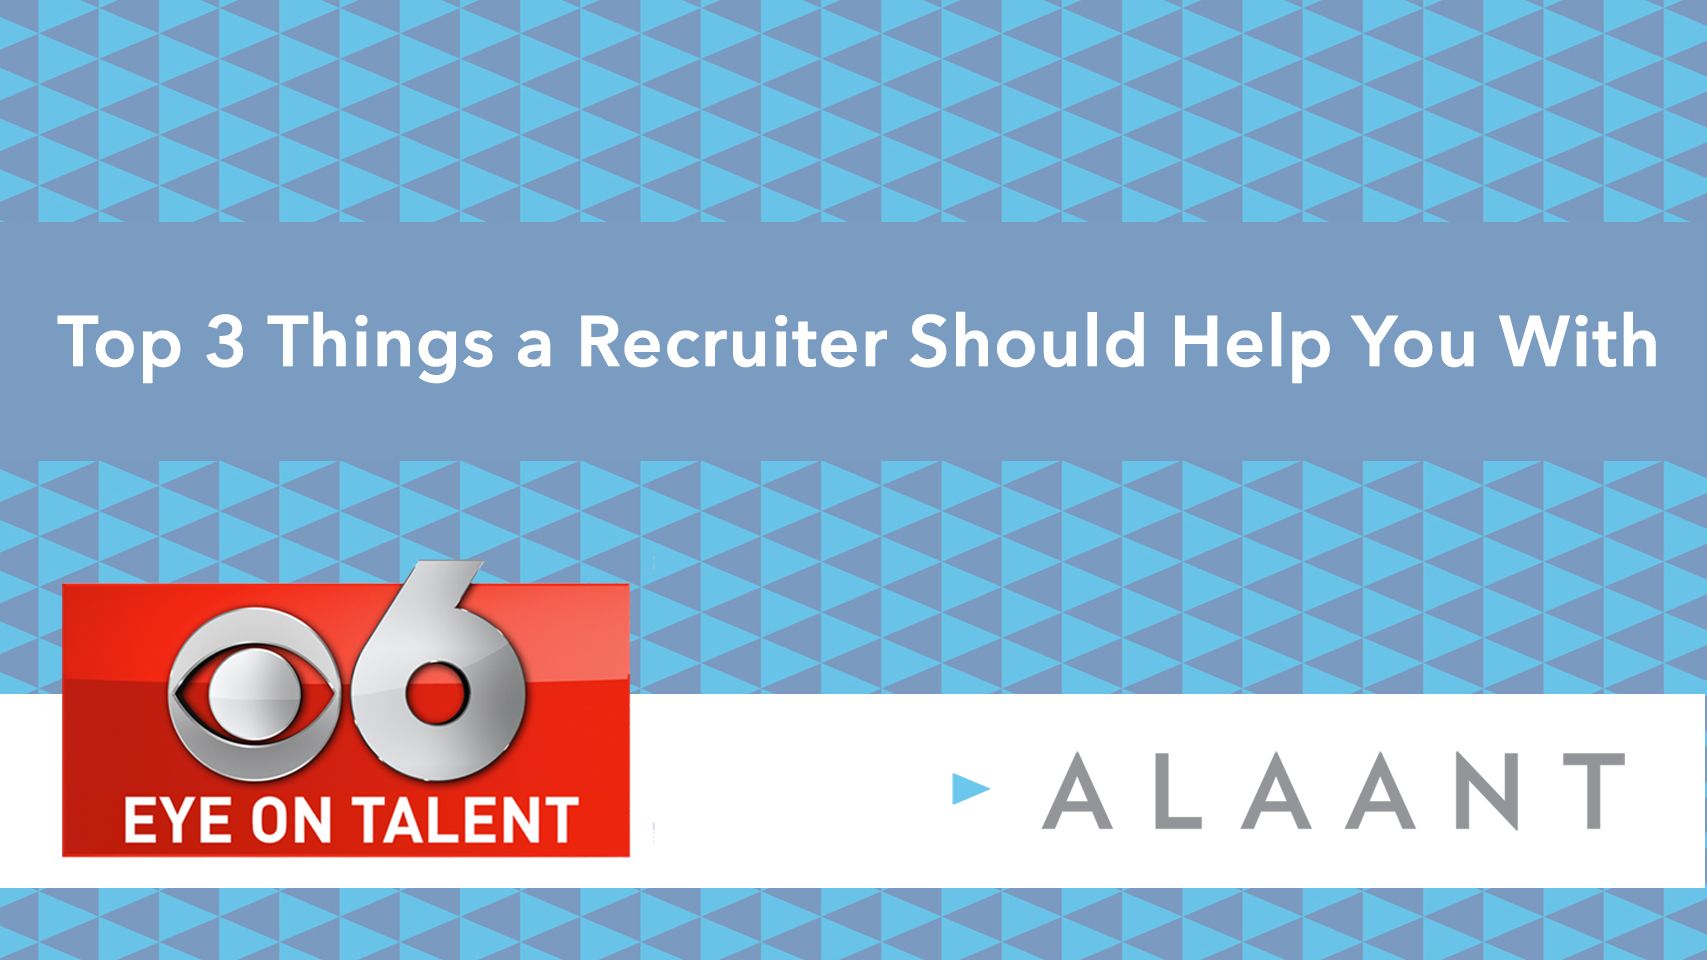 Alaant Eye on Talent Top 3 Things a Recruiter Should Help You With